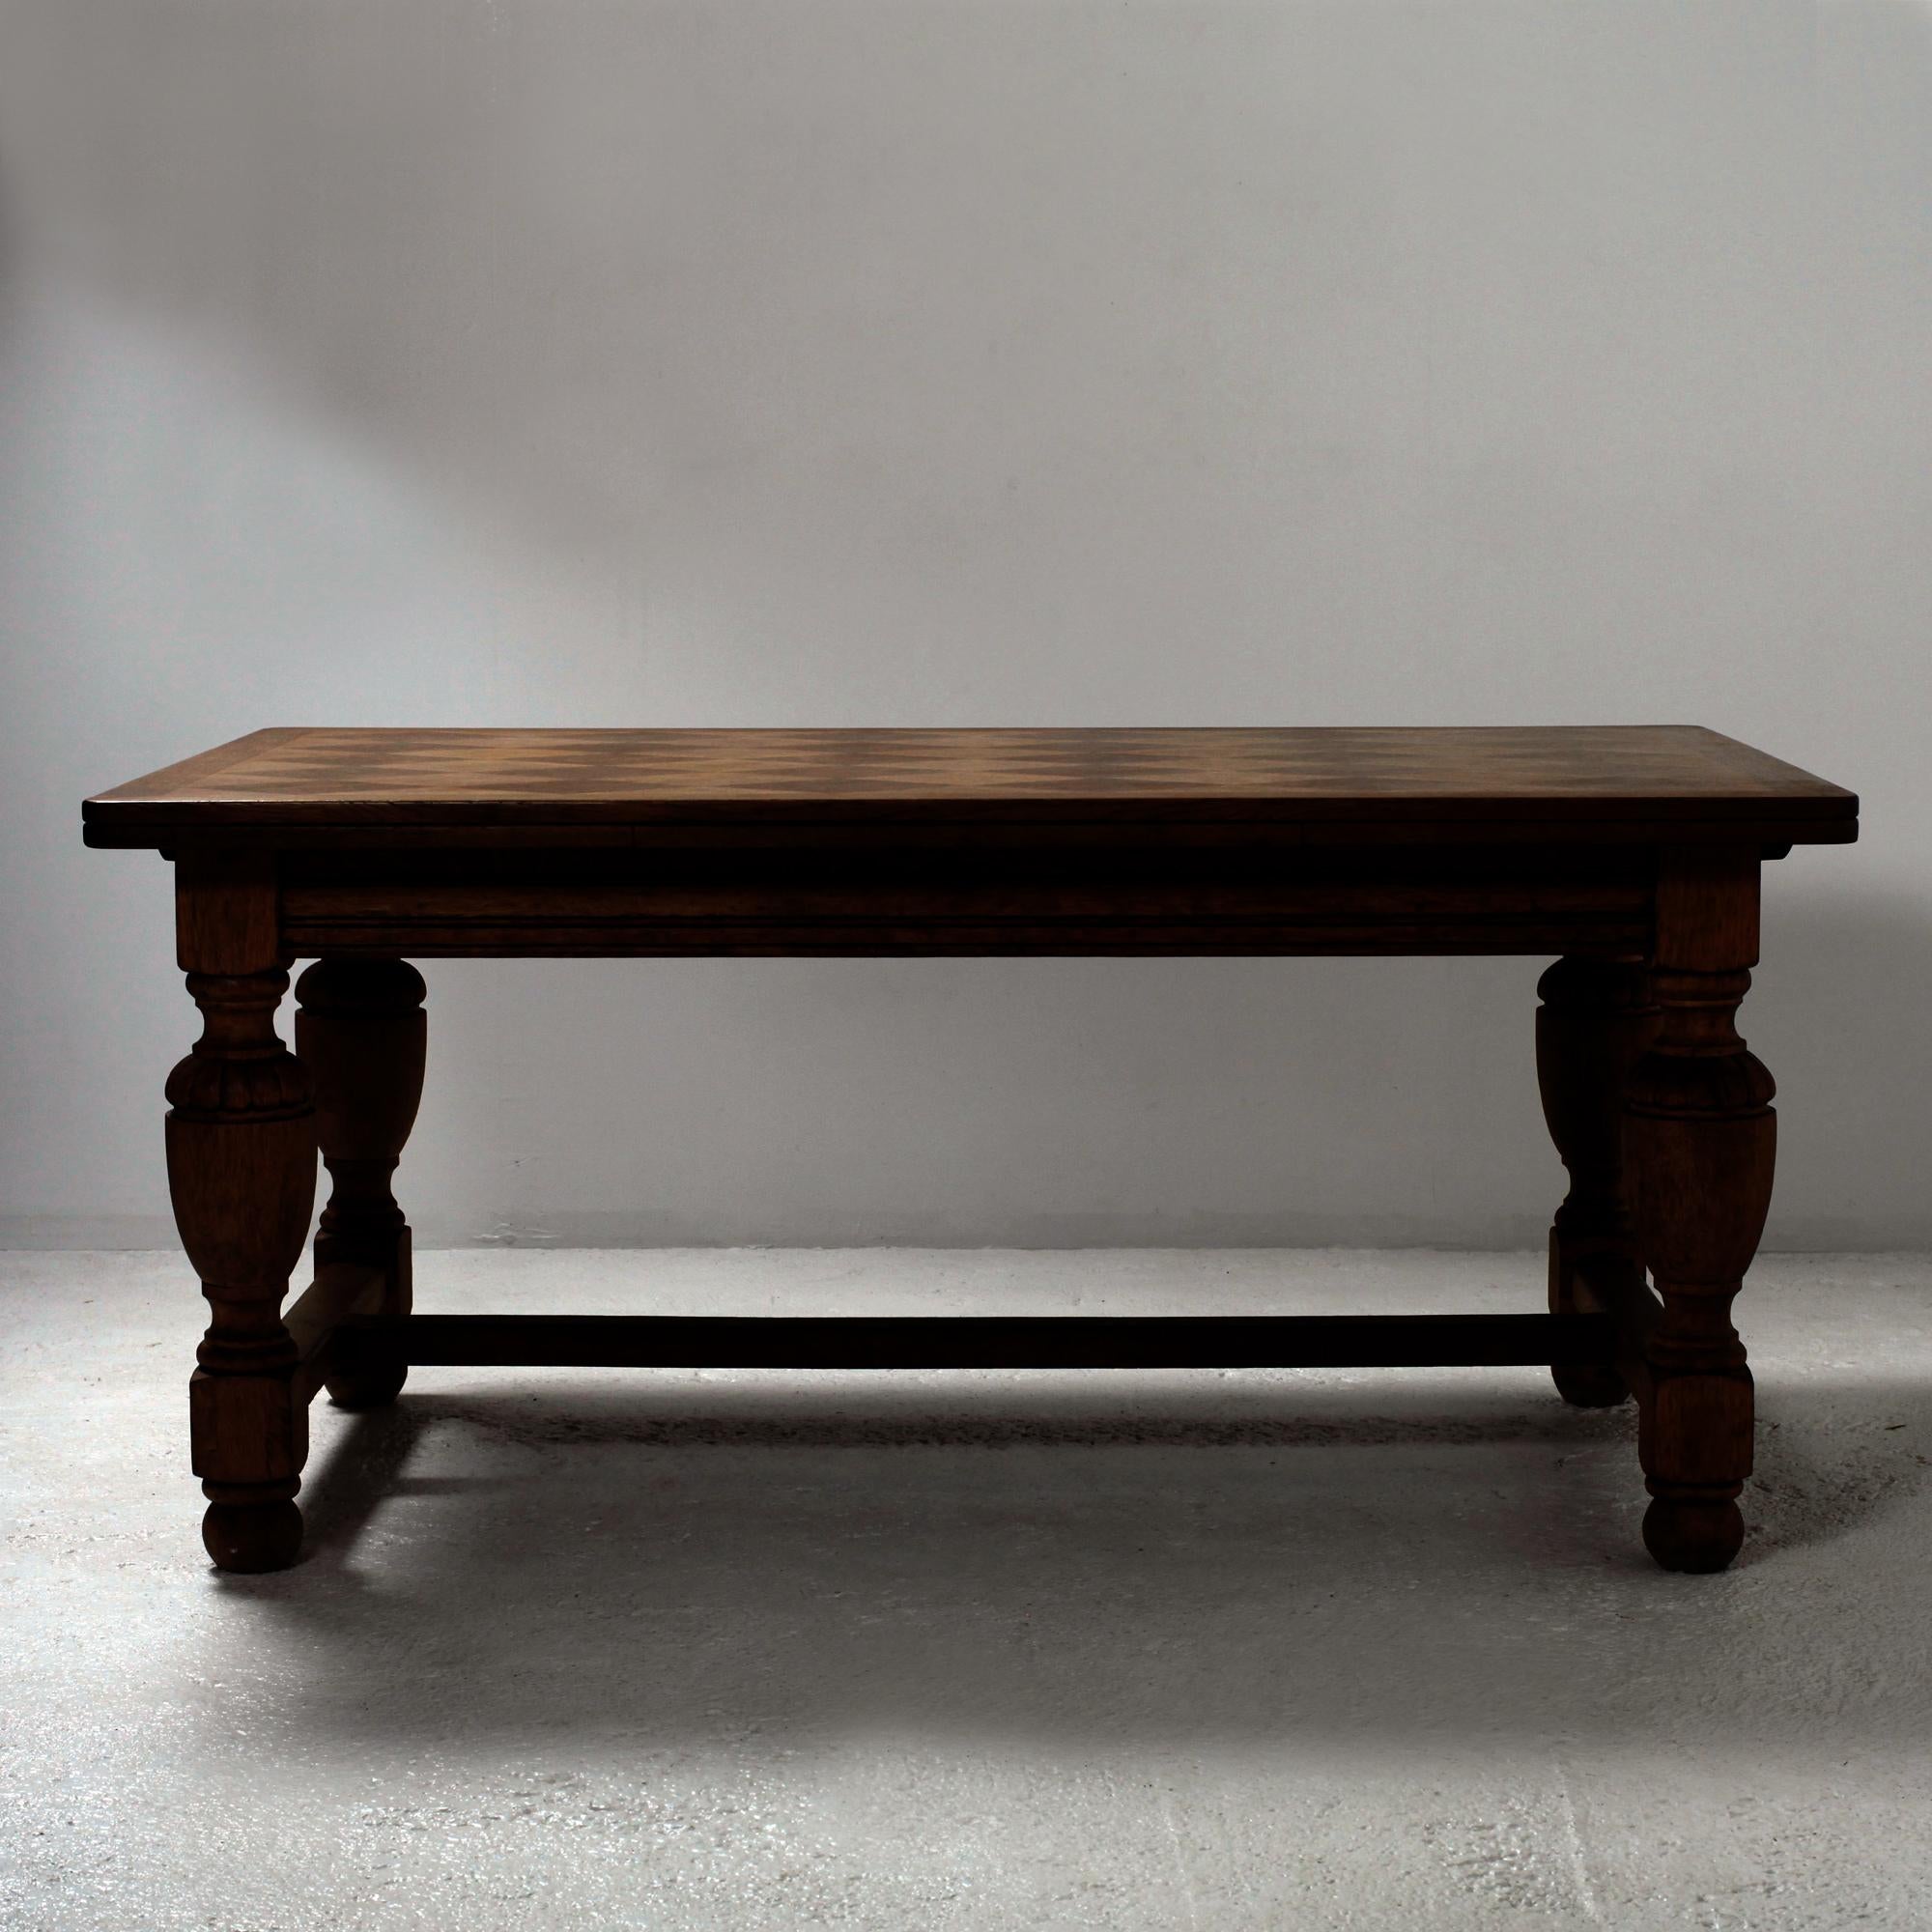 Mid 20th century country french provincial oak dining table in the style of Jean-Charles Moreux. Circa 1940
The table features beautifull marquetered oak top supported by a trestle base.
The trestle is constructed with thick, chunky turned and